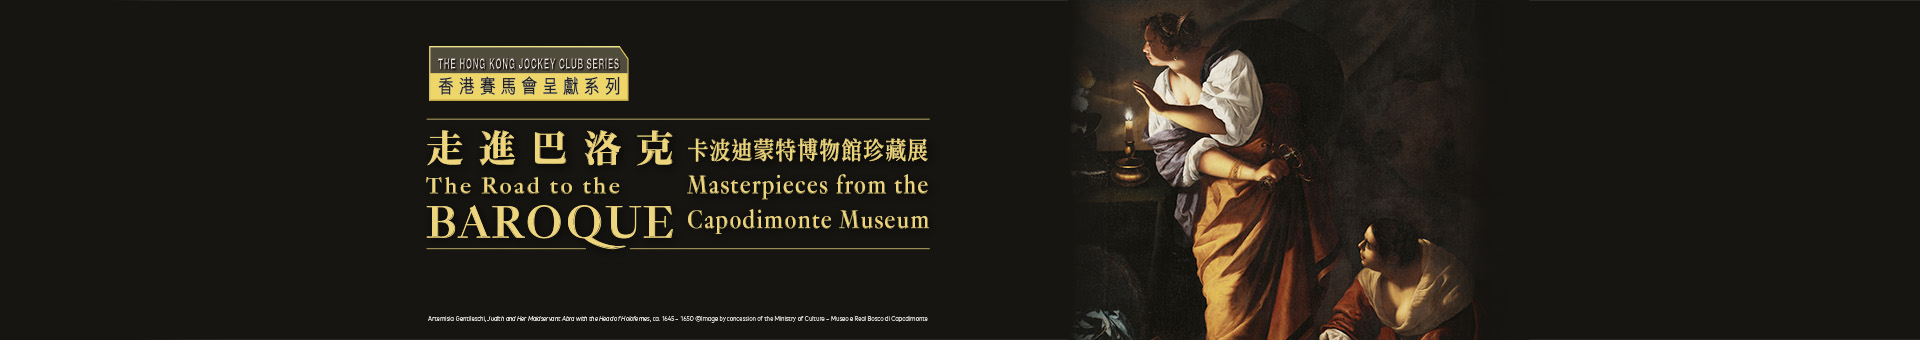 The Hong Kong Jockey Club Series: The Road to the Baroque —Masterpieces from the Capodimonte Museum